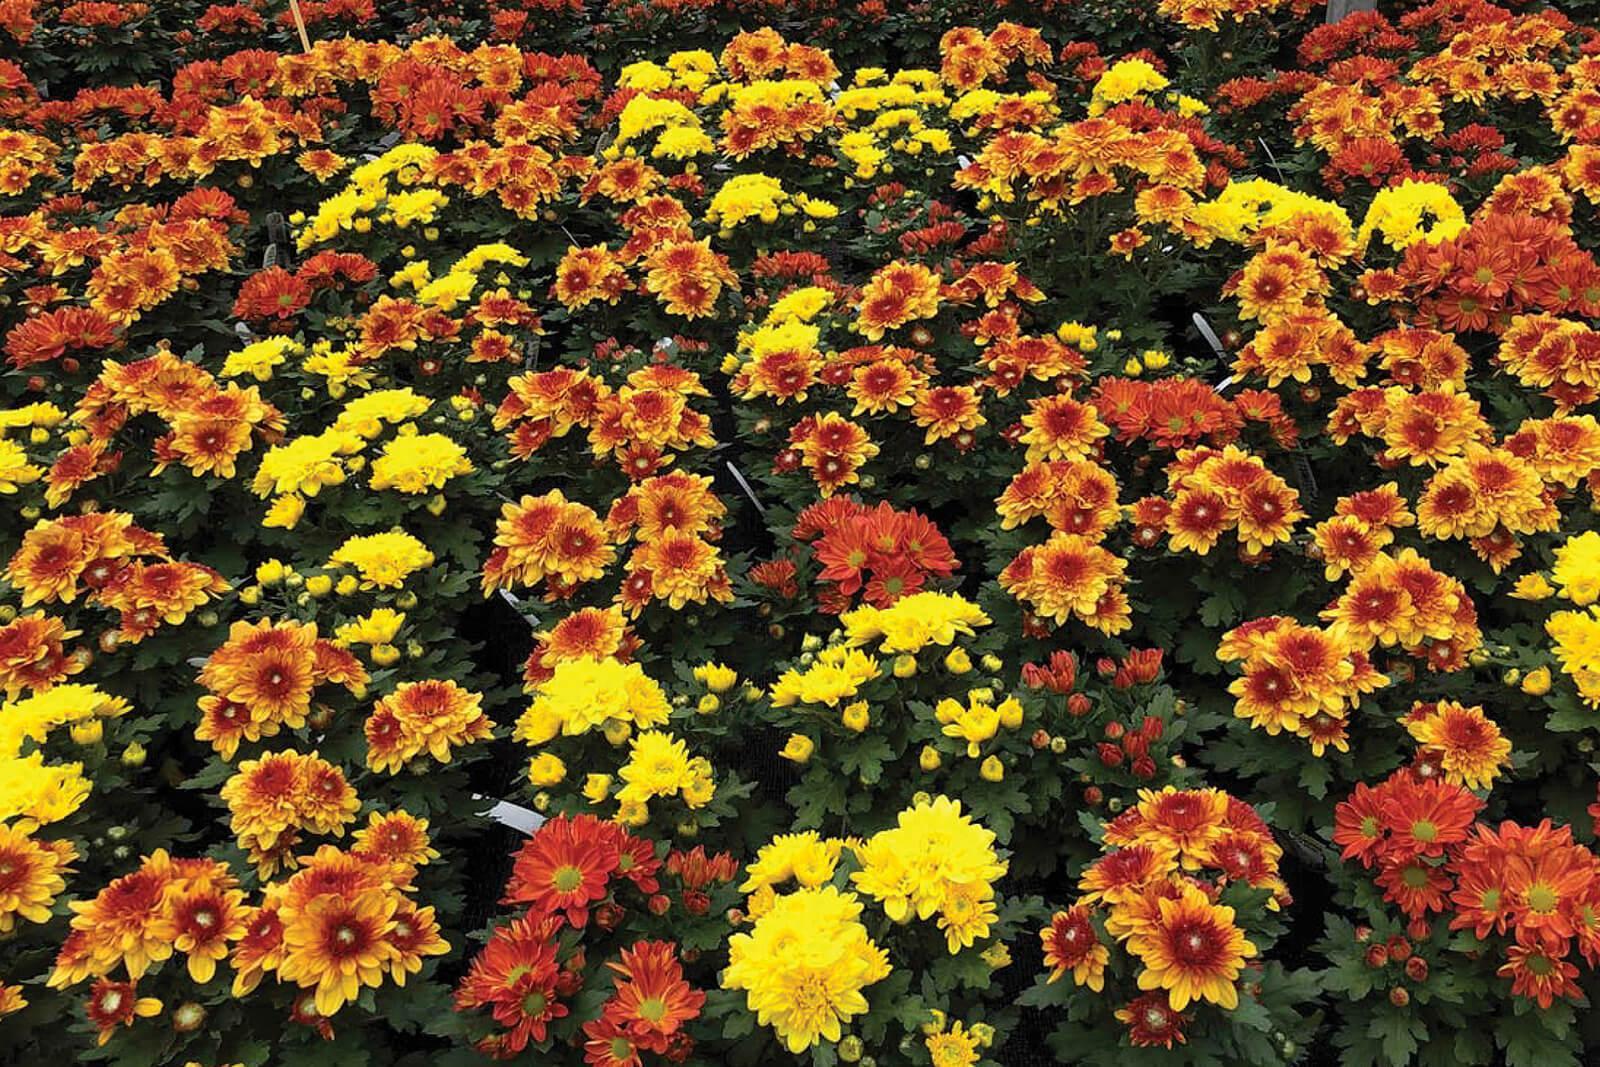 Greenhouse-grown chrysanthemums are just one of the many ongoing research projects managed by COHA.